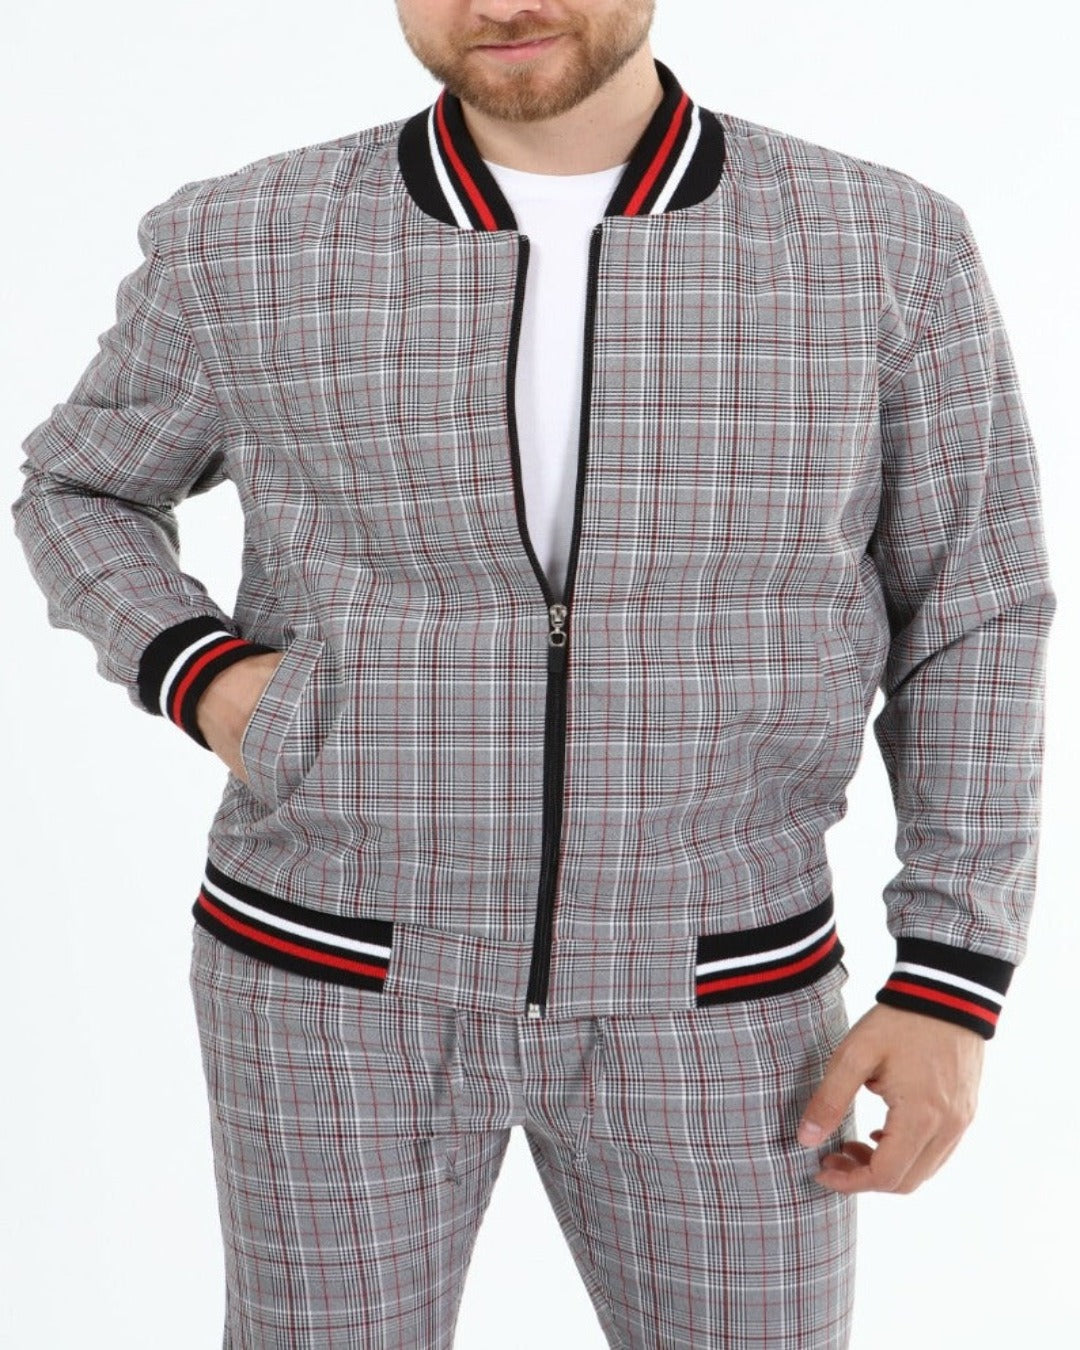 ICONYN GENTLEMAN BOMBER JACKET - Grey and Red Check